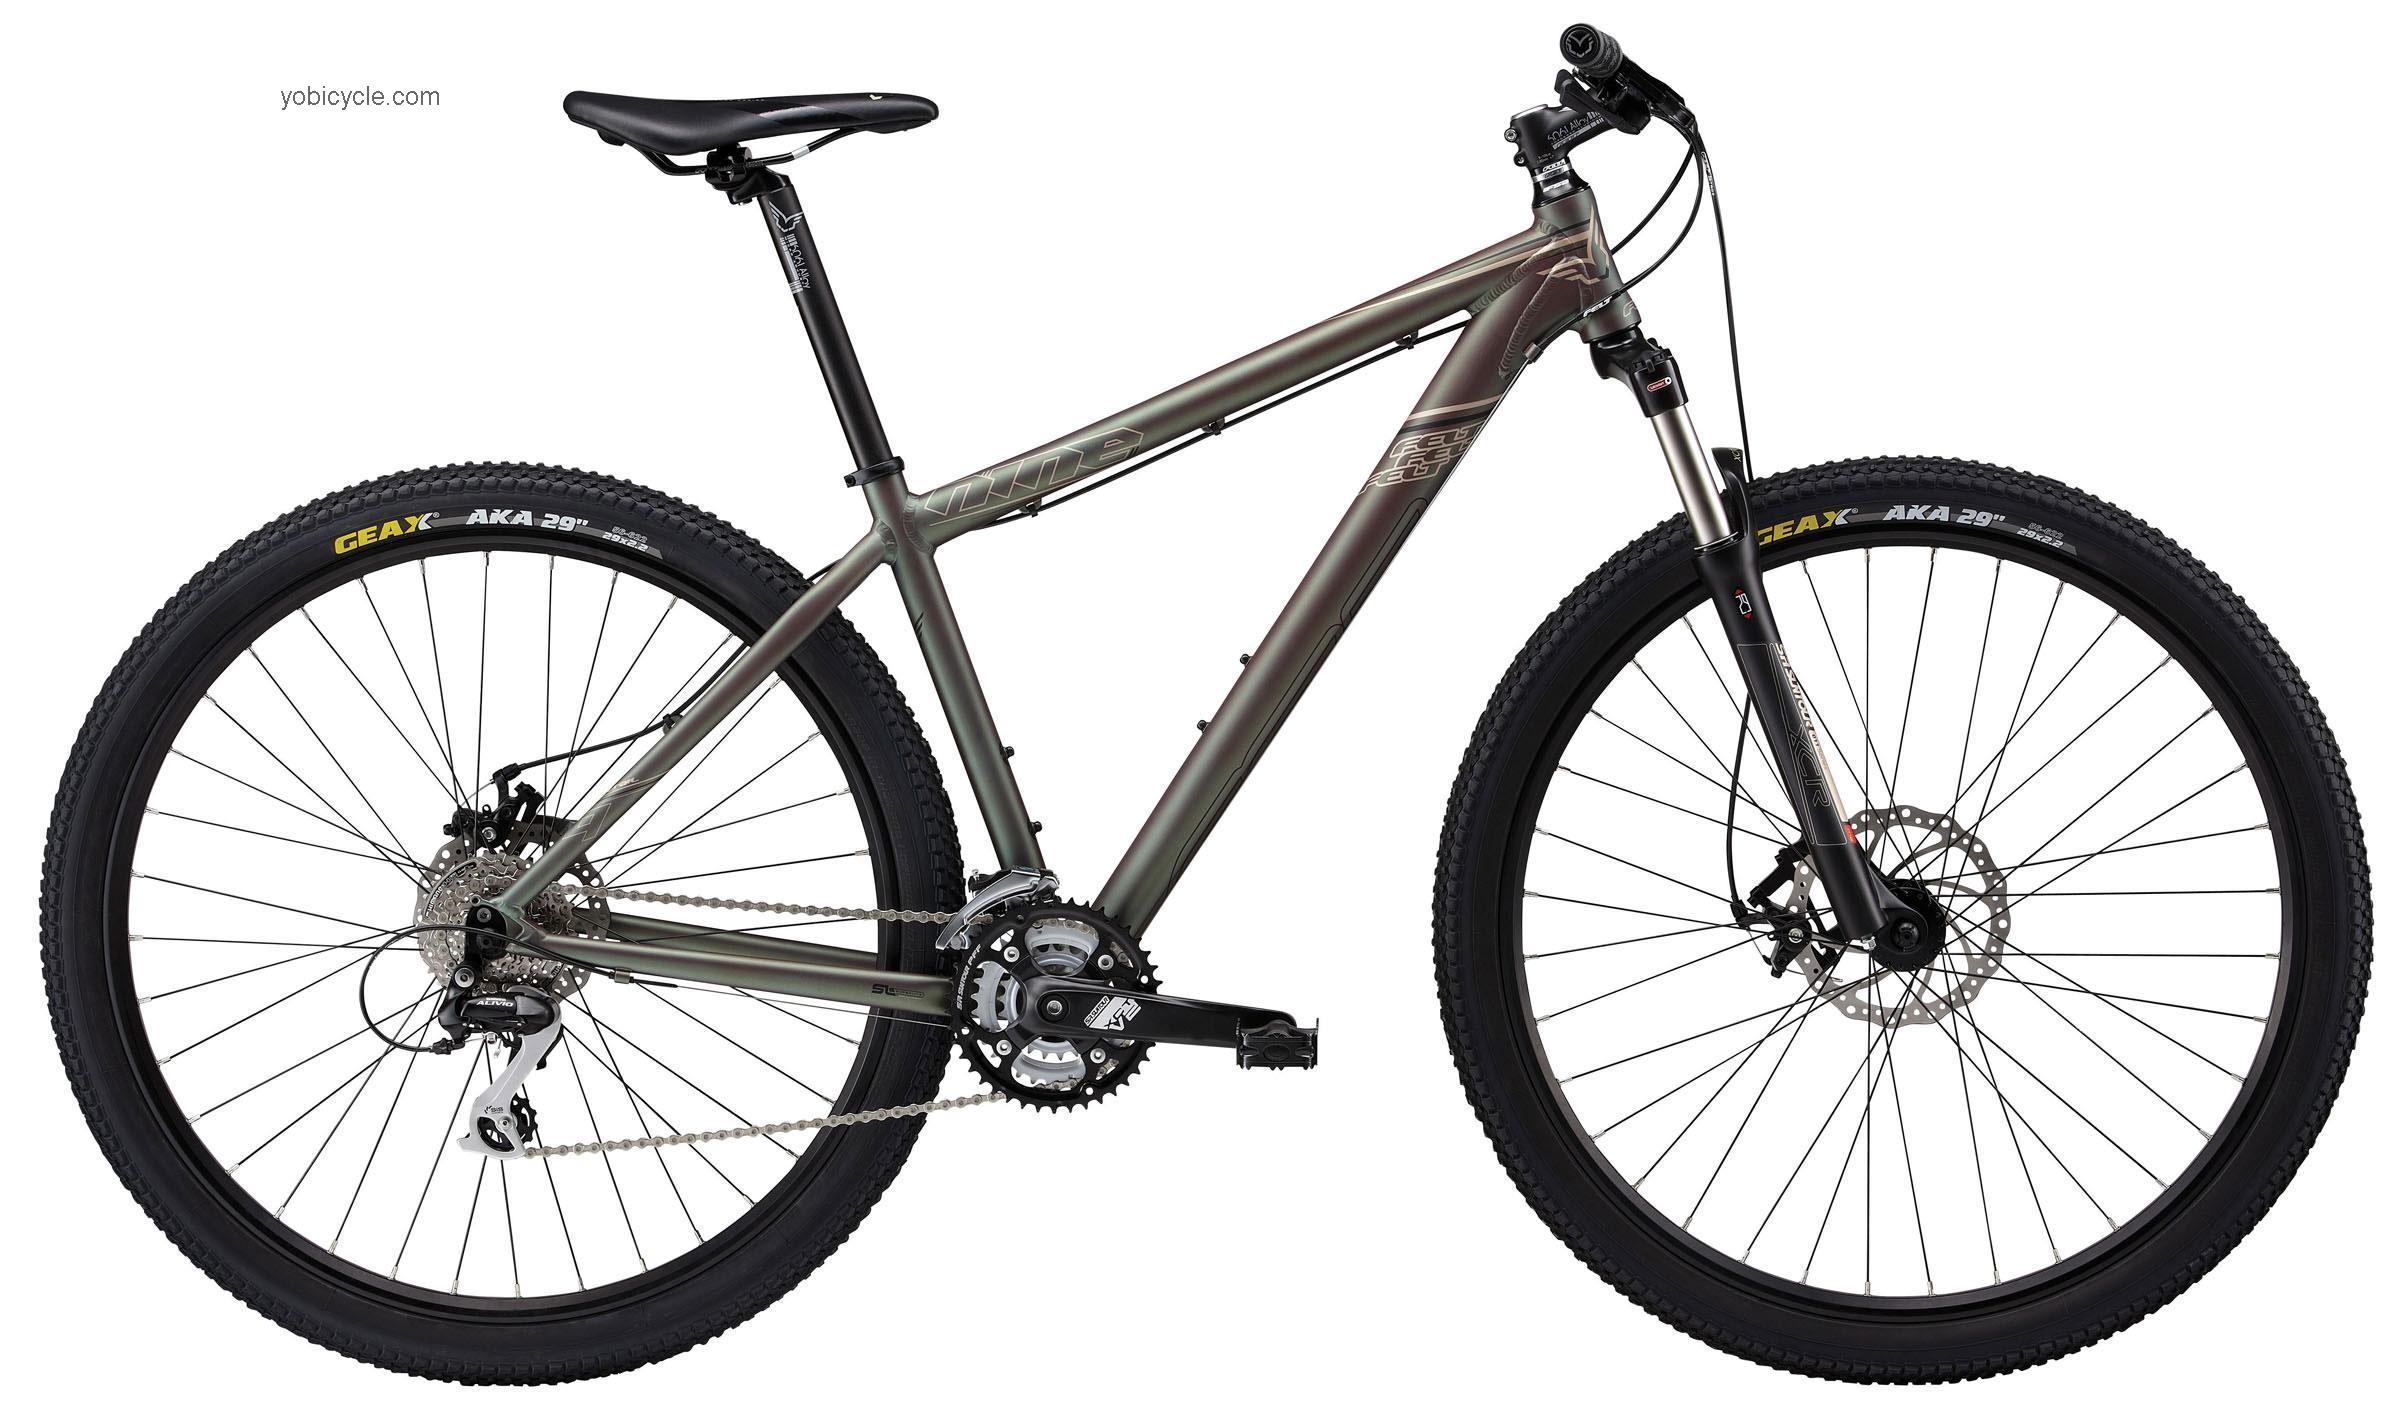 Felt Nine Trail competitors and comparison tool online specs and performance